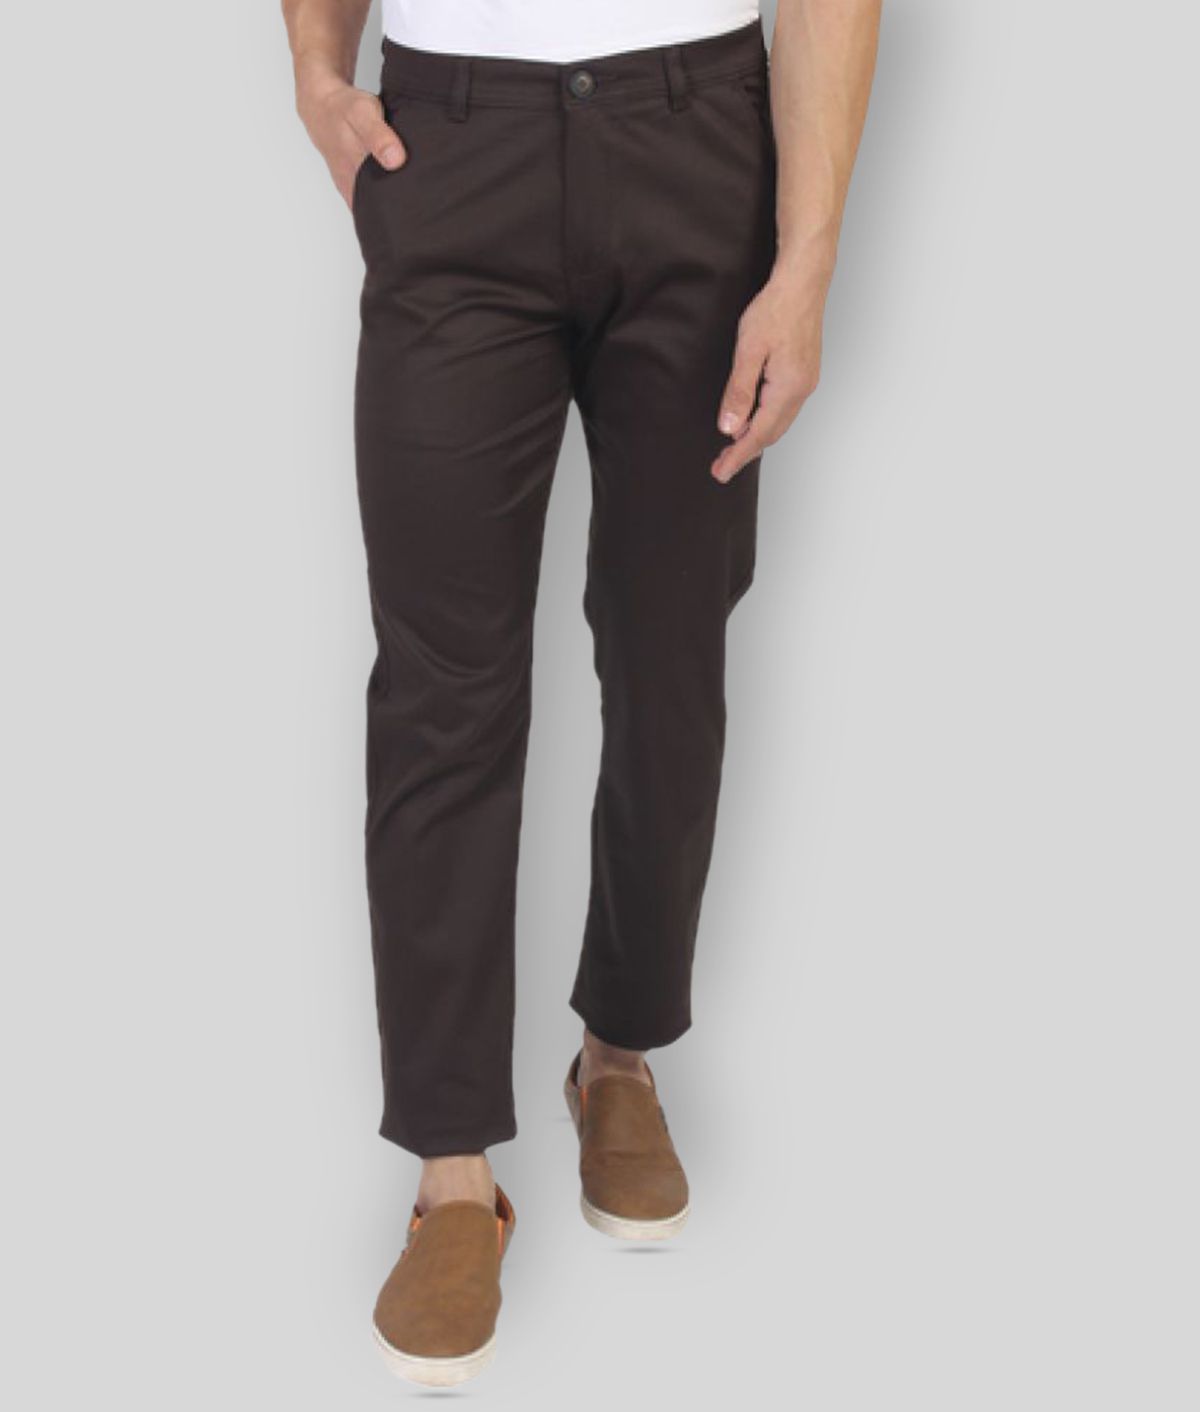 Fluidic - Brown Cotton Blend Regular Fit  Chinos (Pack of 1)